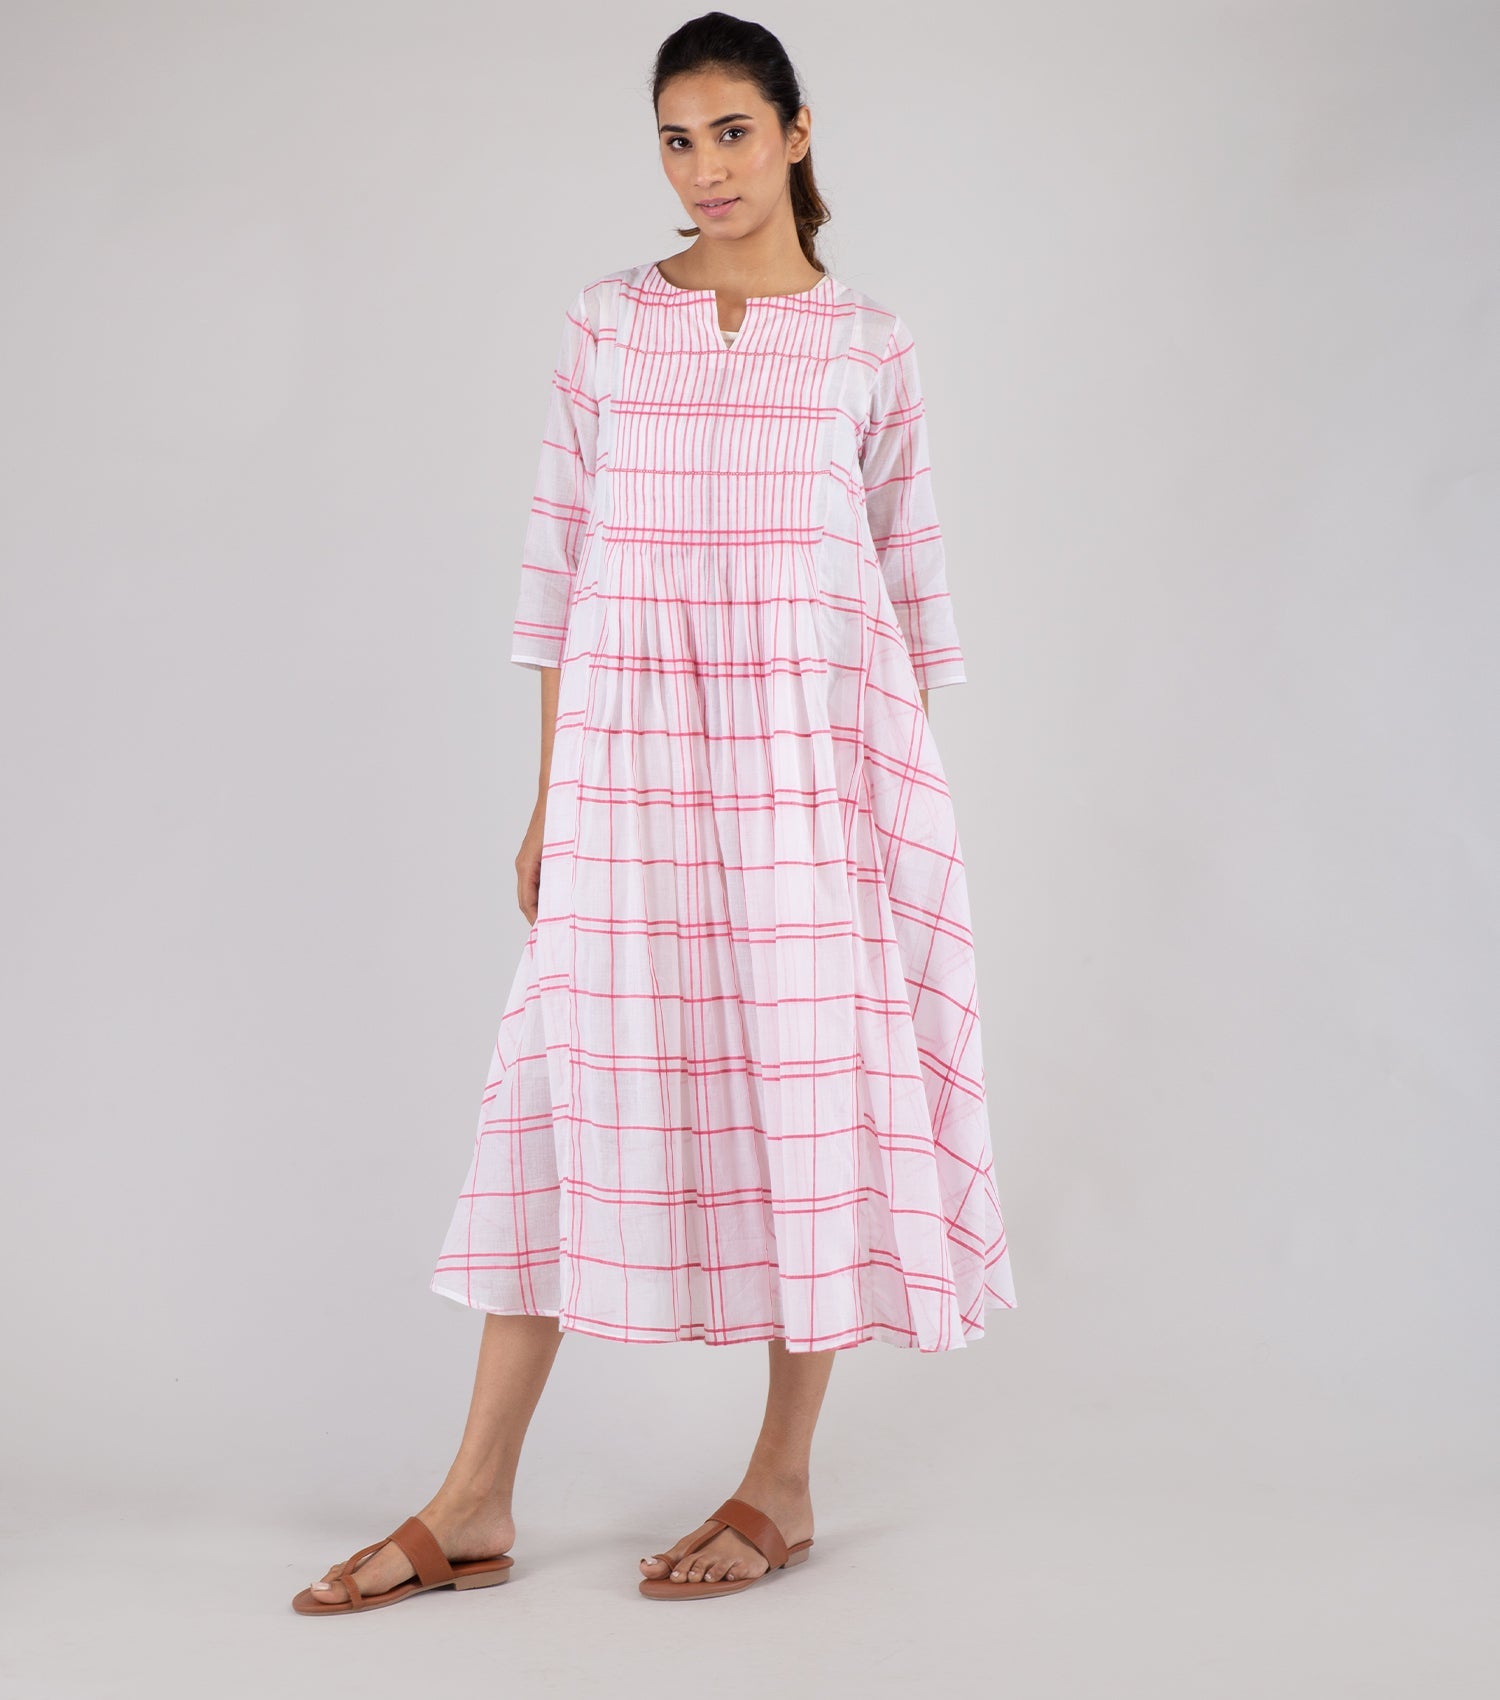 Ivory & Pink Woven Cotton Checkered Dress